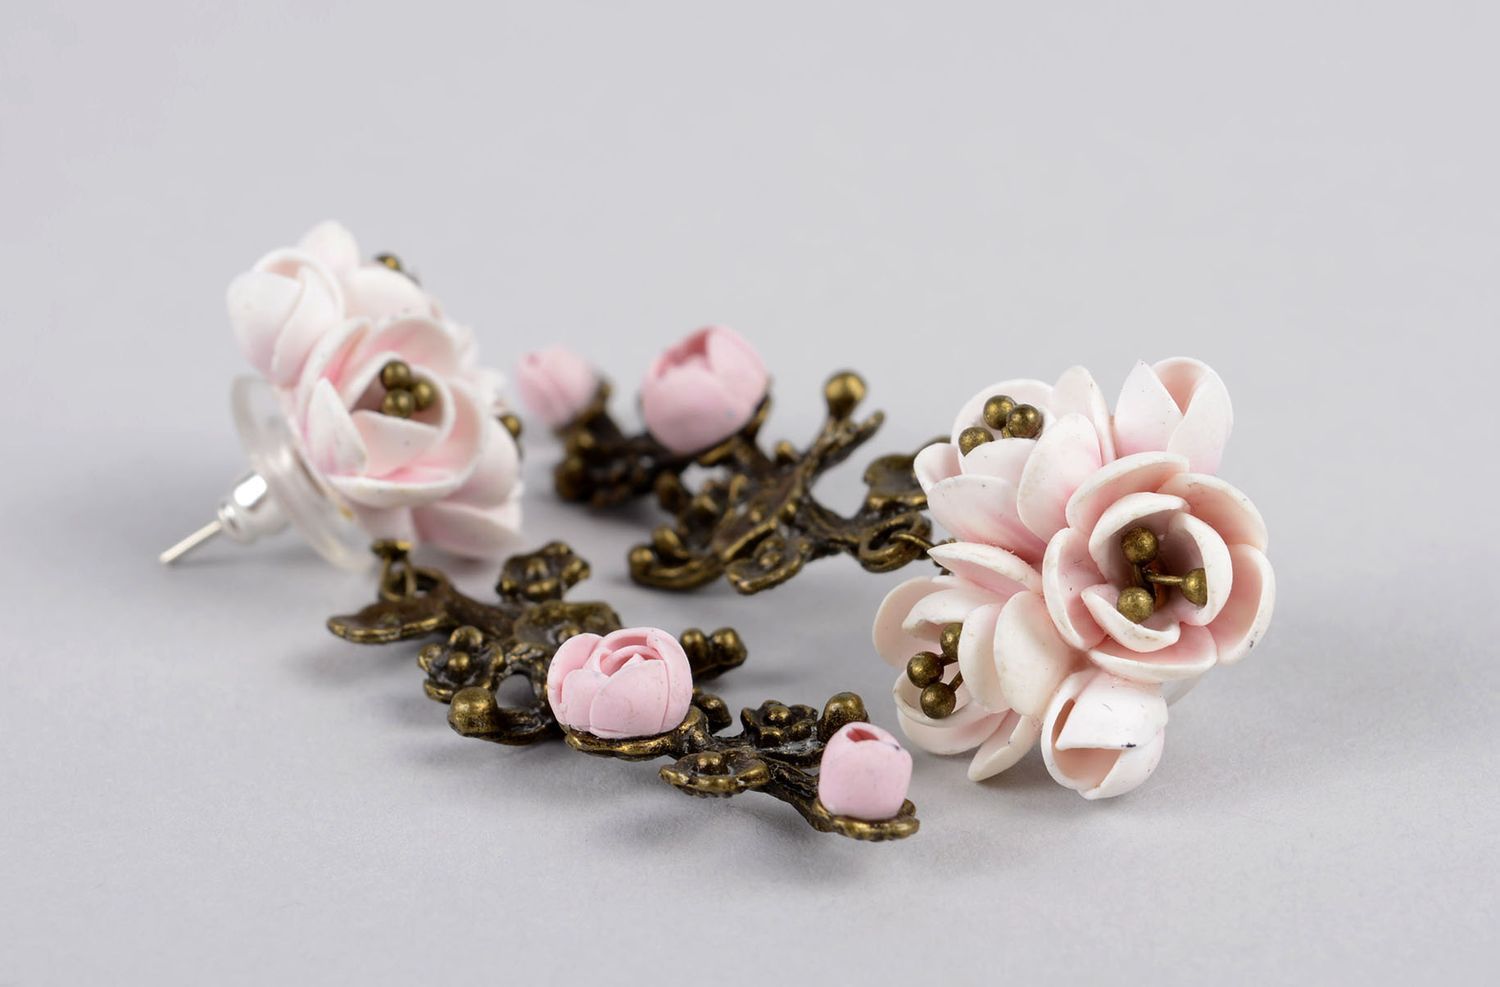 Handmade polymer clay earrings with charms delicate earrings with pink flowers photo 5